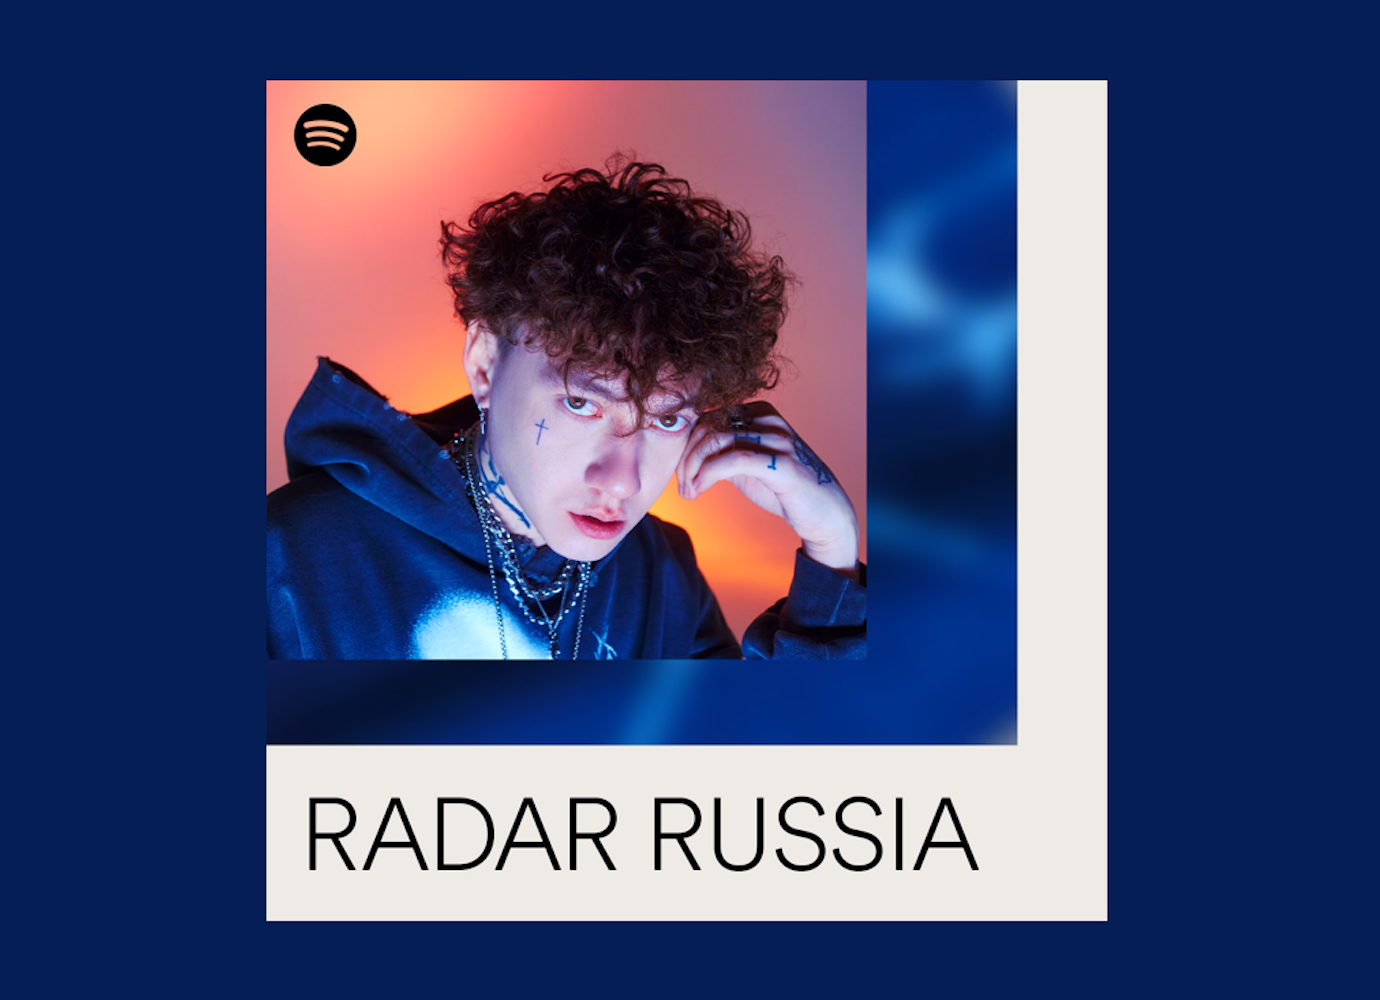 Radar Russia: get to know Russia’s emerging musicians on Spotify